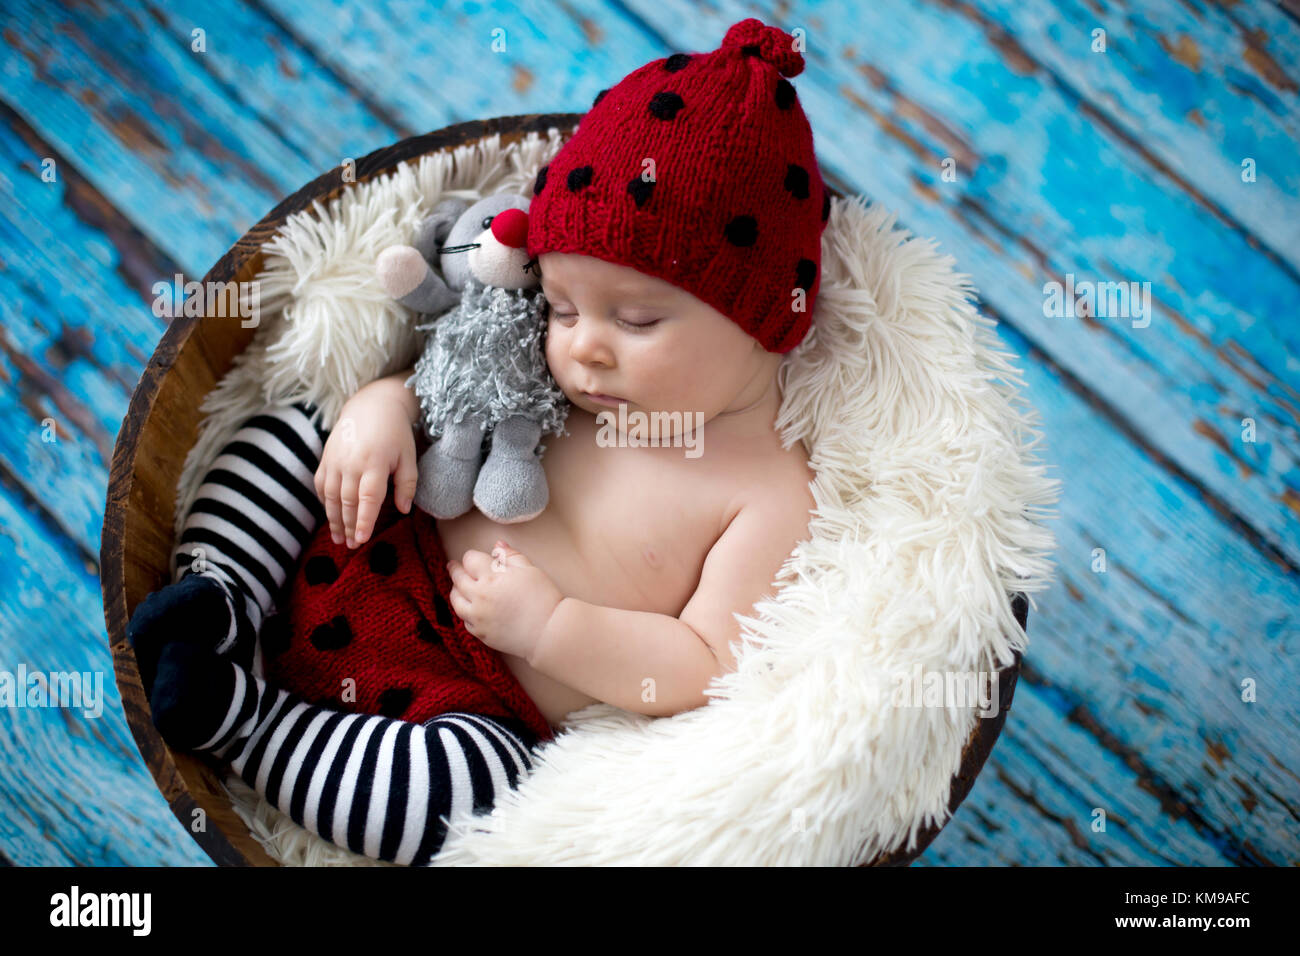 Little baby boy with knitted ladybug hat and pants in a basket, sleeping peacefully in a basket, isolated studio shot Stock Photo